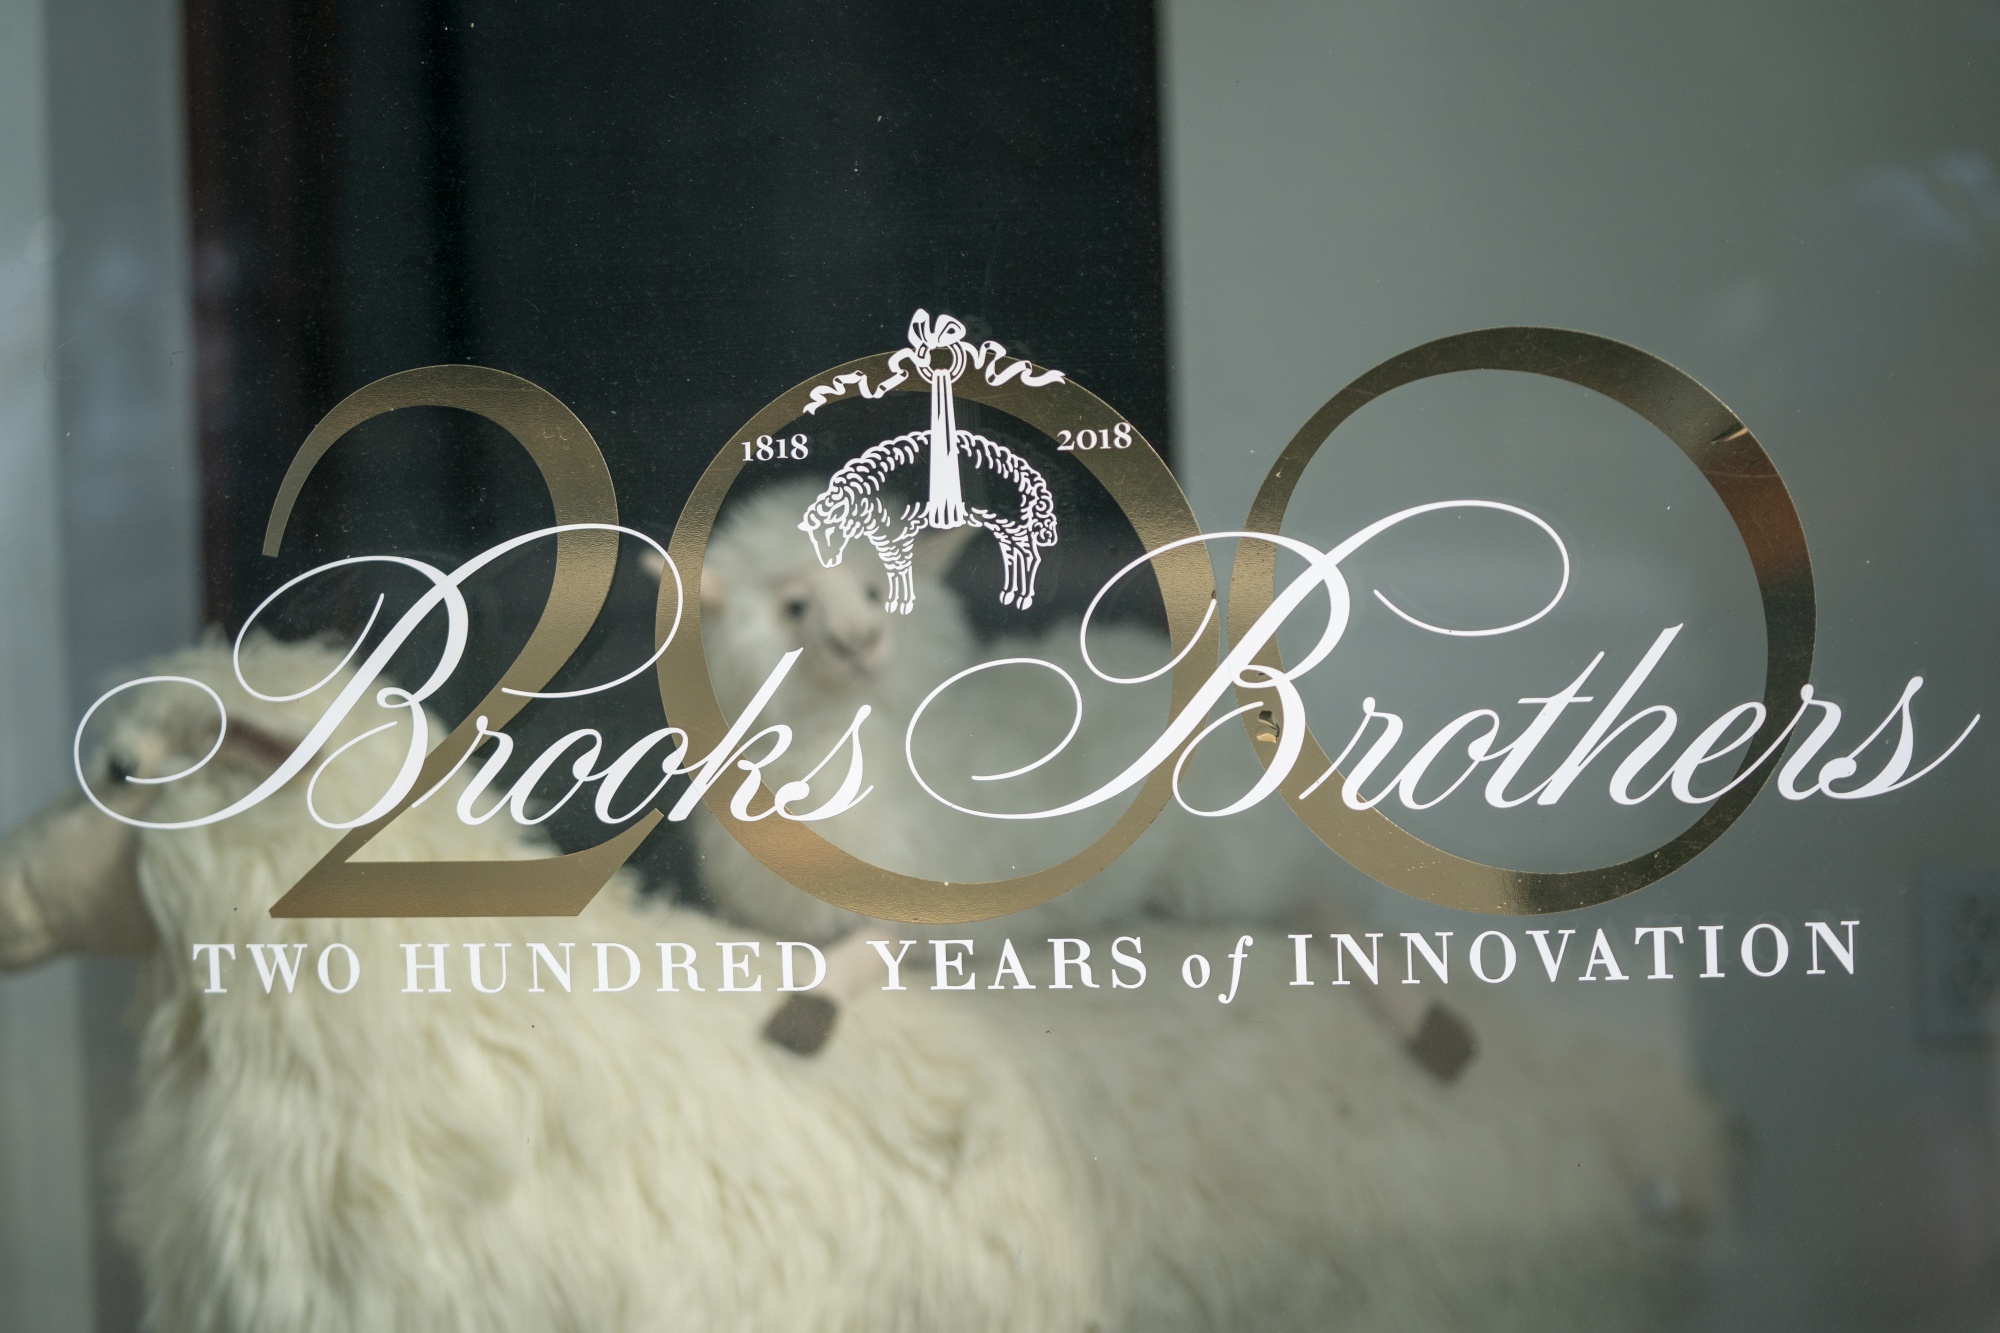 brooks brothers ownership